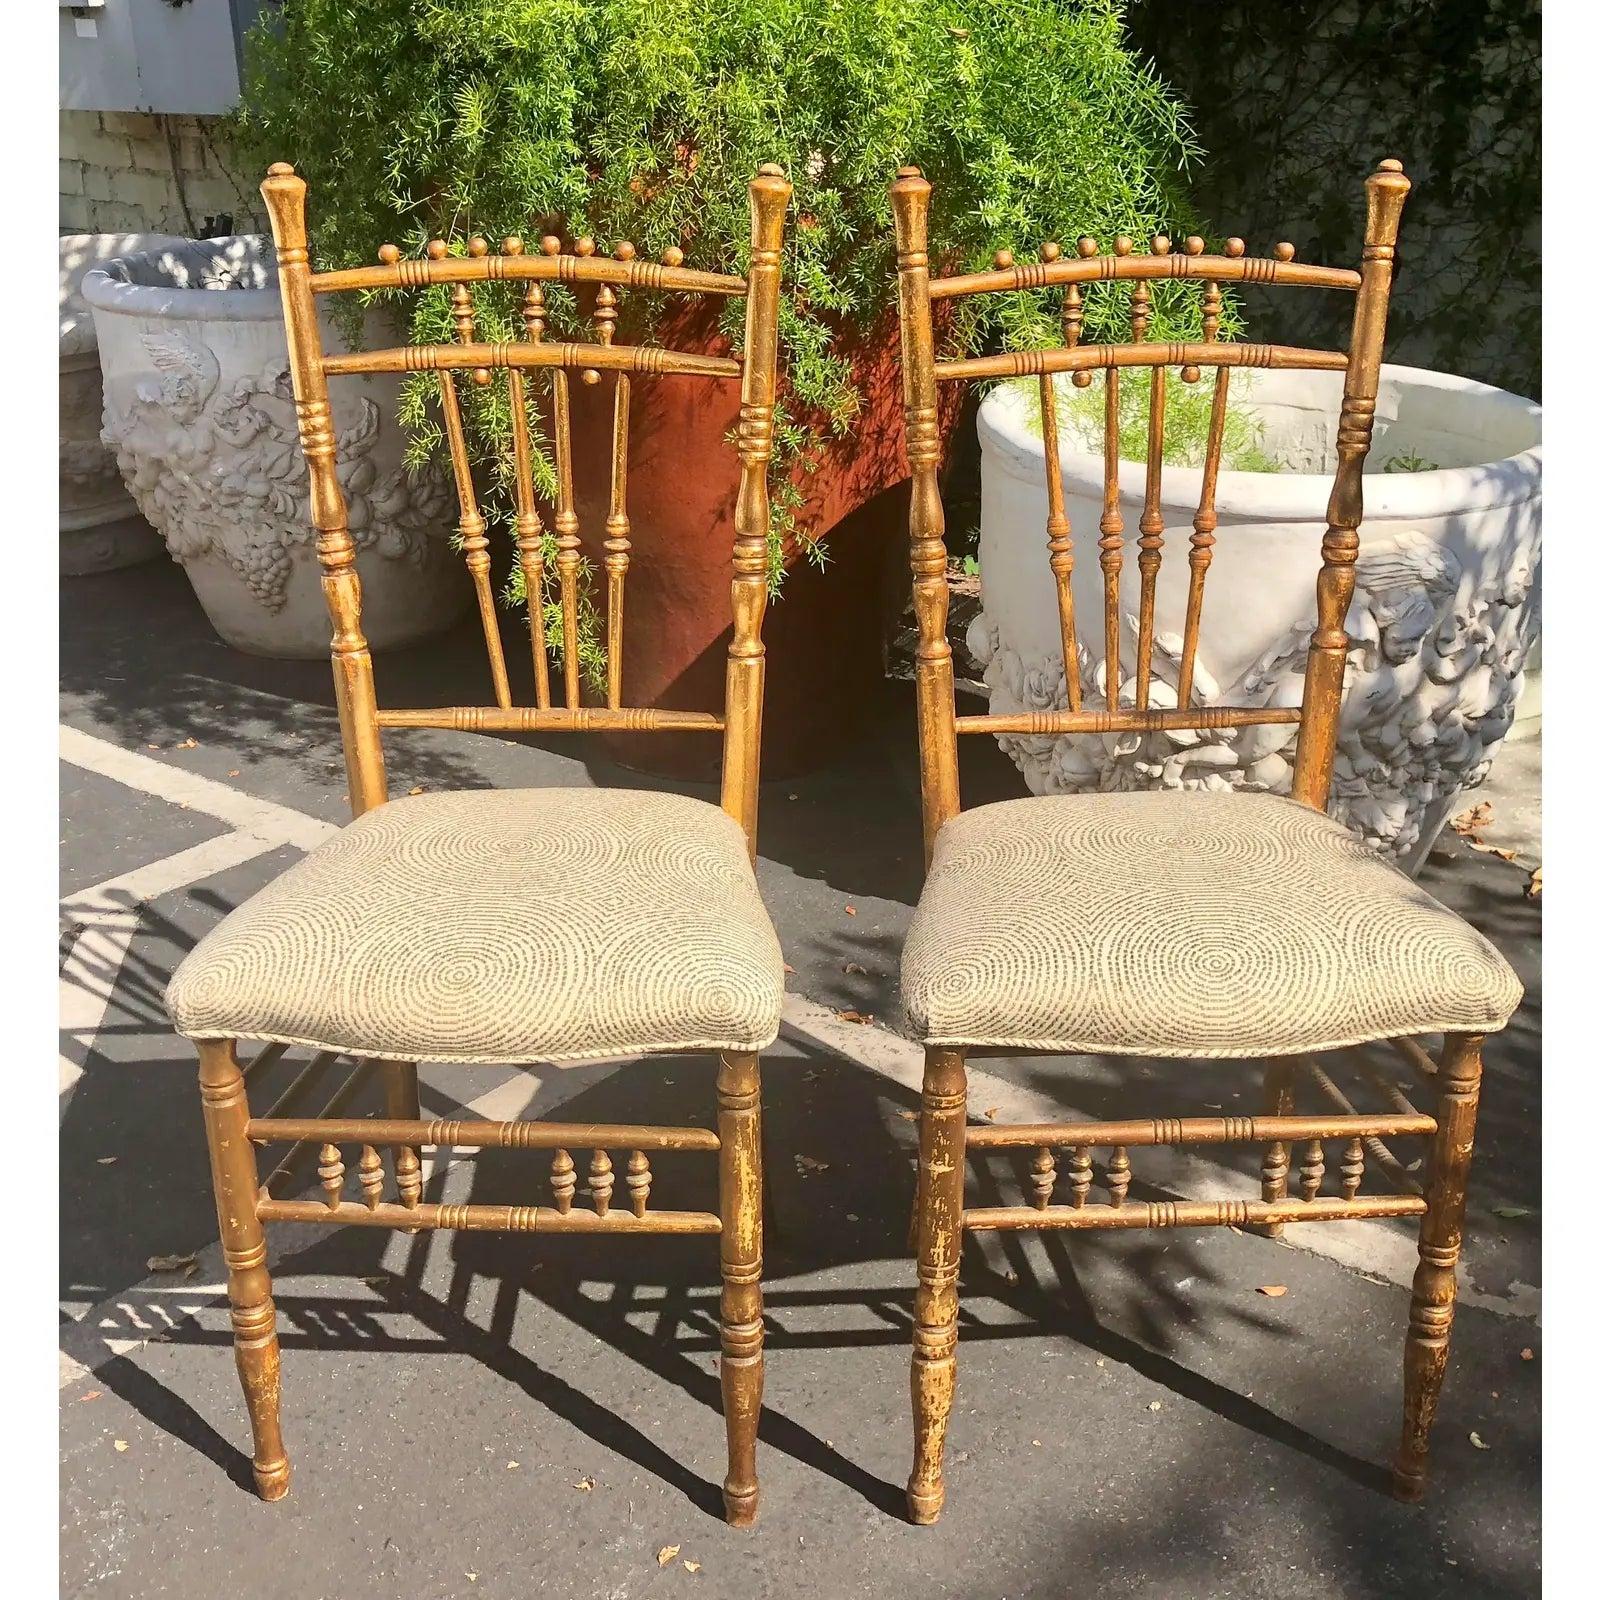 Pair of antique Regency style side chairs

Additional information:
Materials: Giltwood
Color: Gold
Period: Late 19th Century
Styles: Regency
Number of Seats: 2
Item Type: Vintage, Antique or Pre-owned
Dimensions: 17